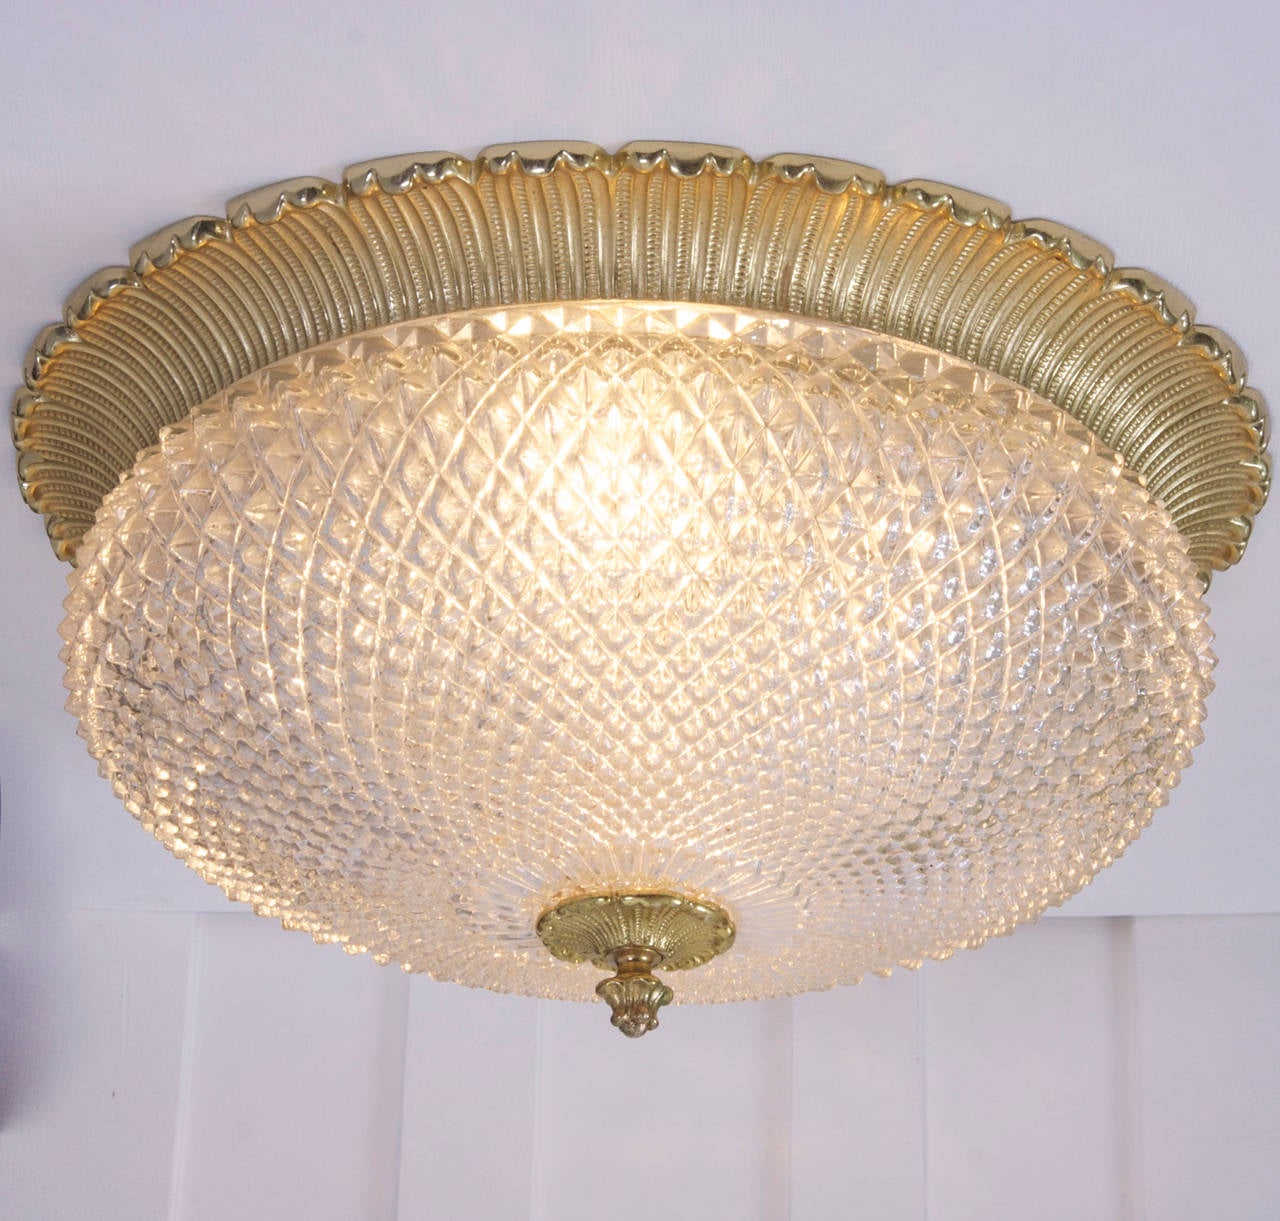 Beautiful and very rare in this huge size. The honeycomb glass flush mount from the 60s has a real gold plated base and head. Fantastic glass quality. Other honeycomb flush mounts are also listed. 4 x E27
To be on the the safe side, the lamp should